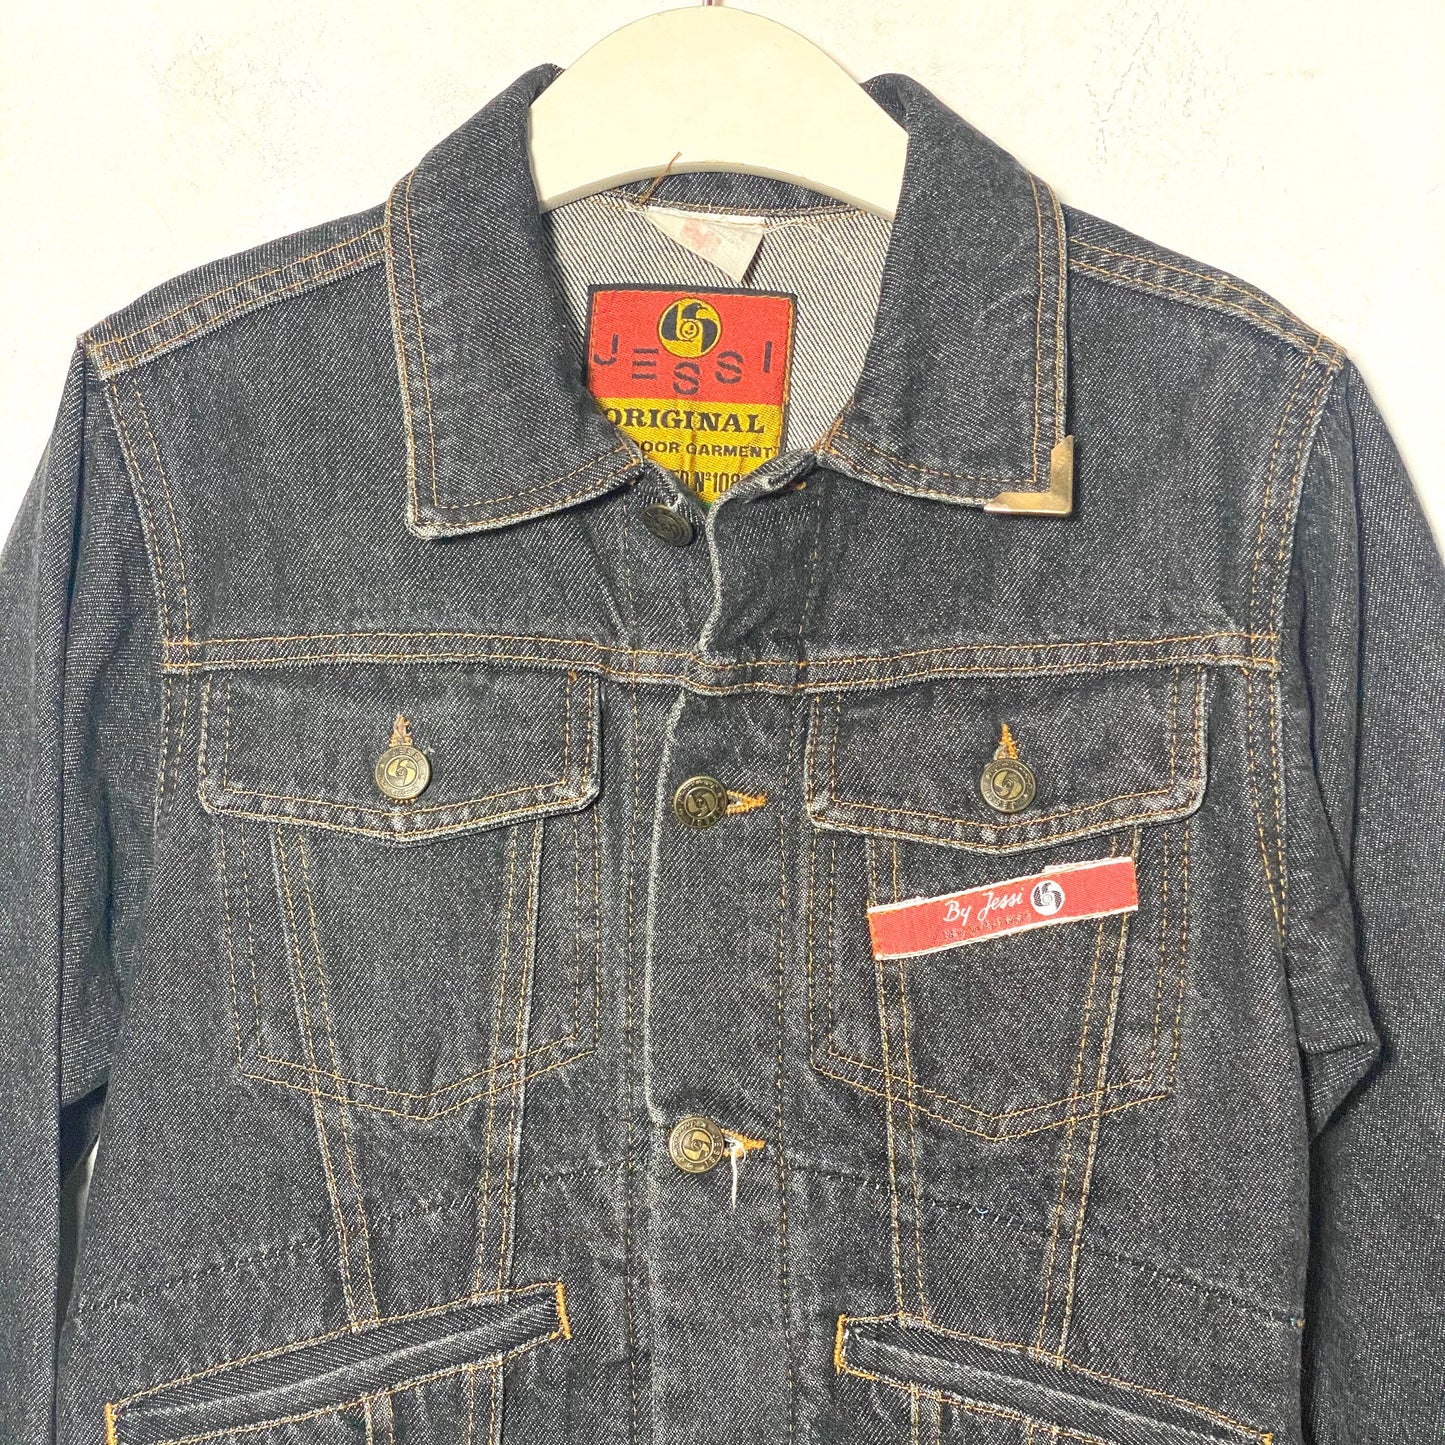 Lucifer anger patched ladies grey denim trucker jacked by Jessi INLT, made in. italy in the 80s, perfect